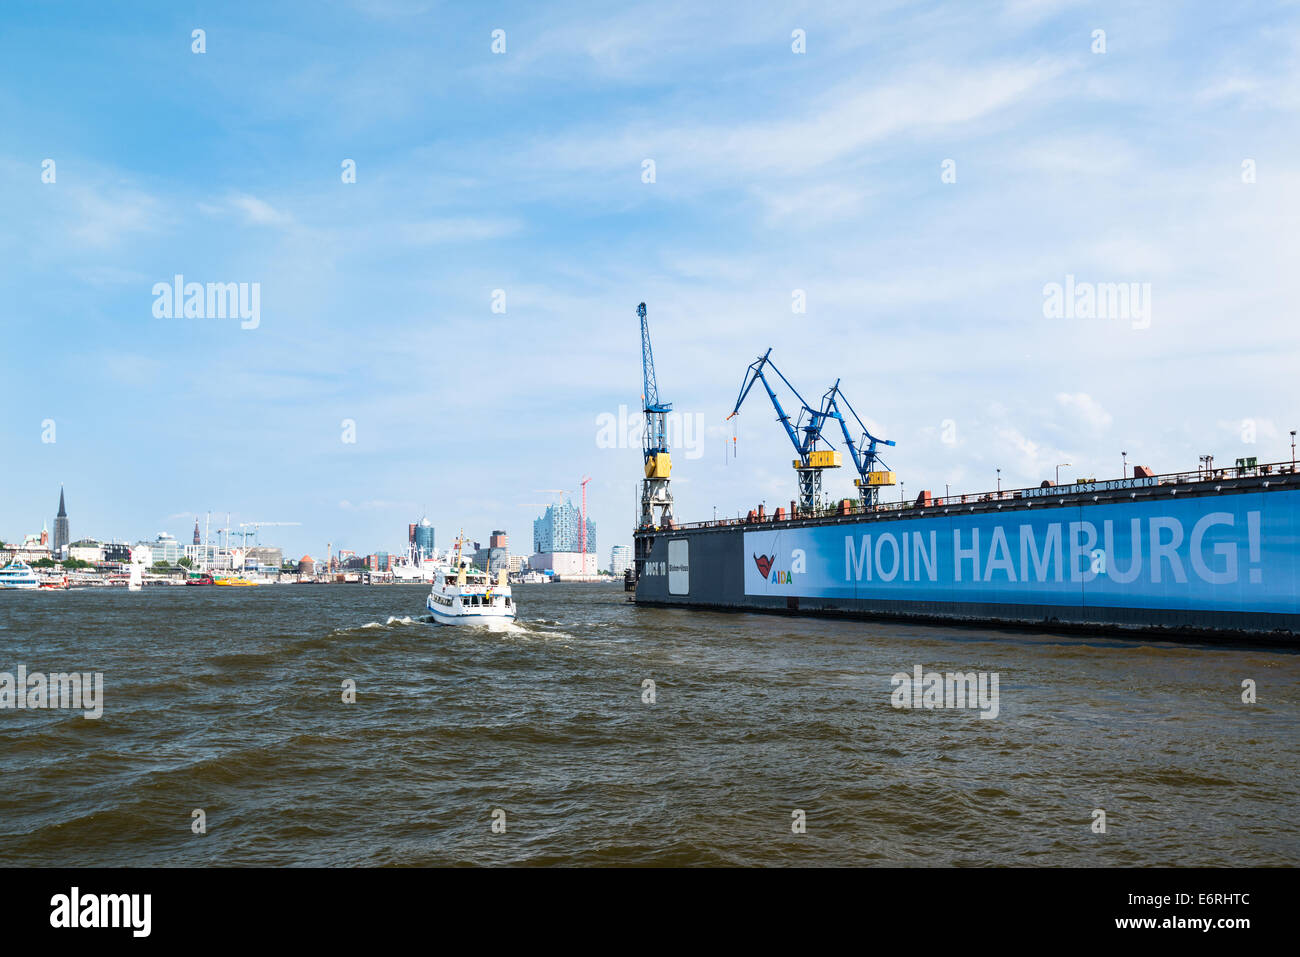 HAMBURG, GERMANY - JULY 21, 2014: The famous Blohm And Voss drydock number 10 with a banner stating “Moin (local slang for Good Stock Photo